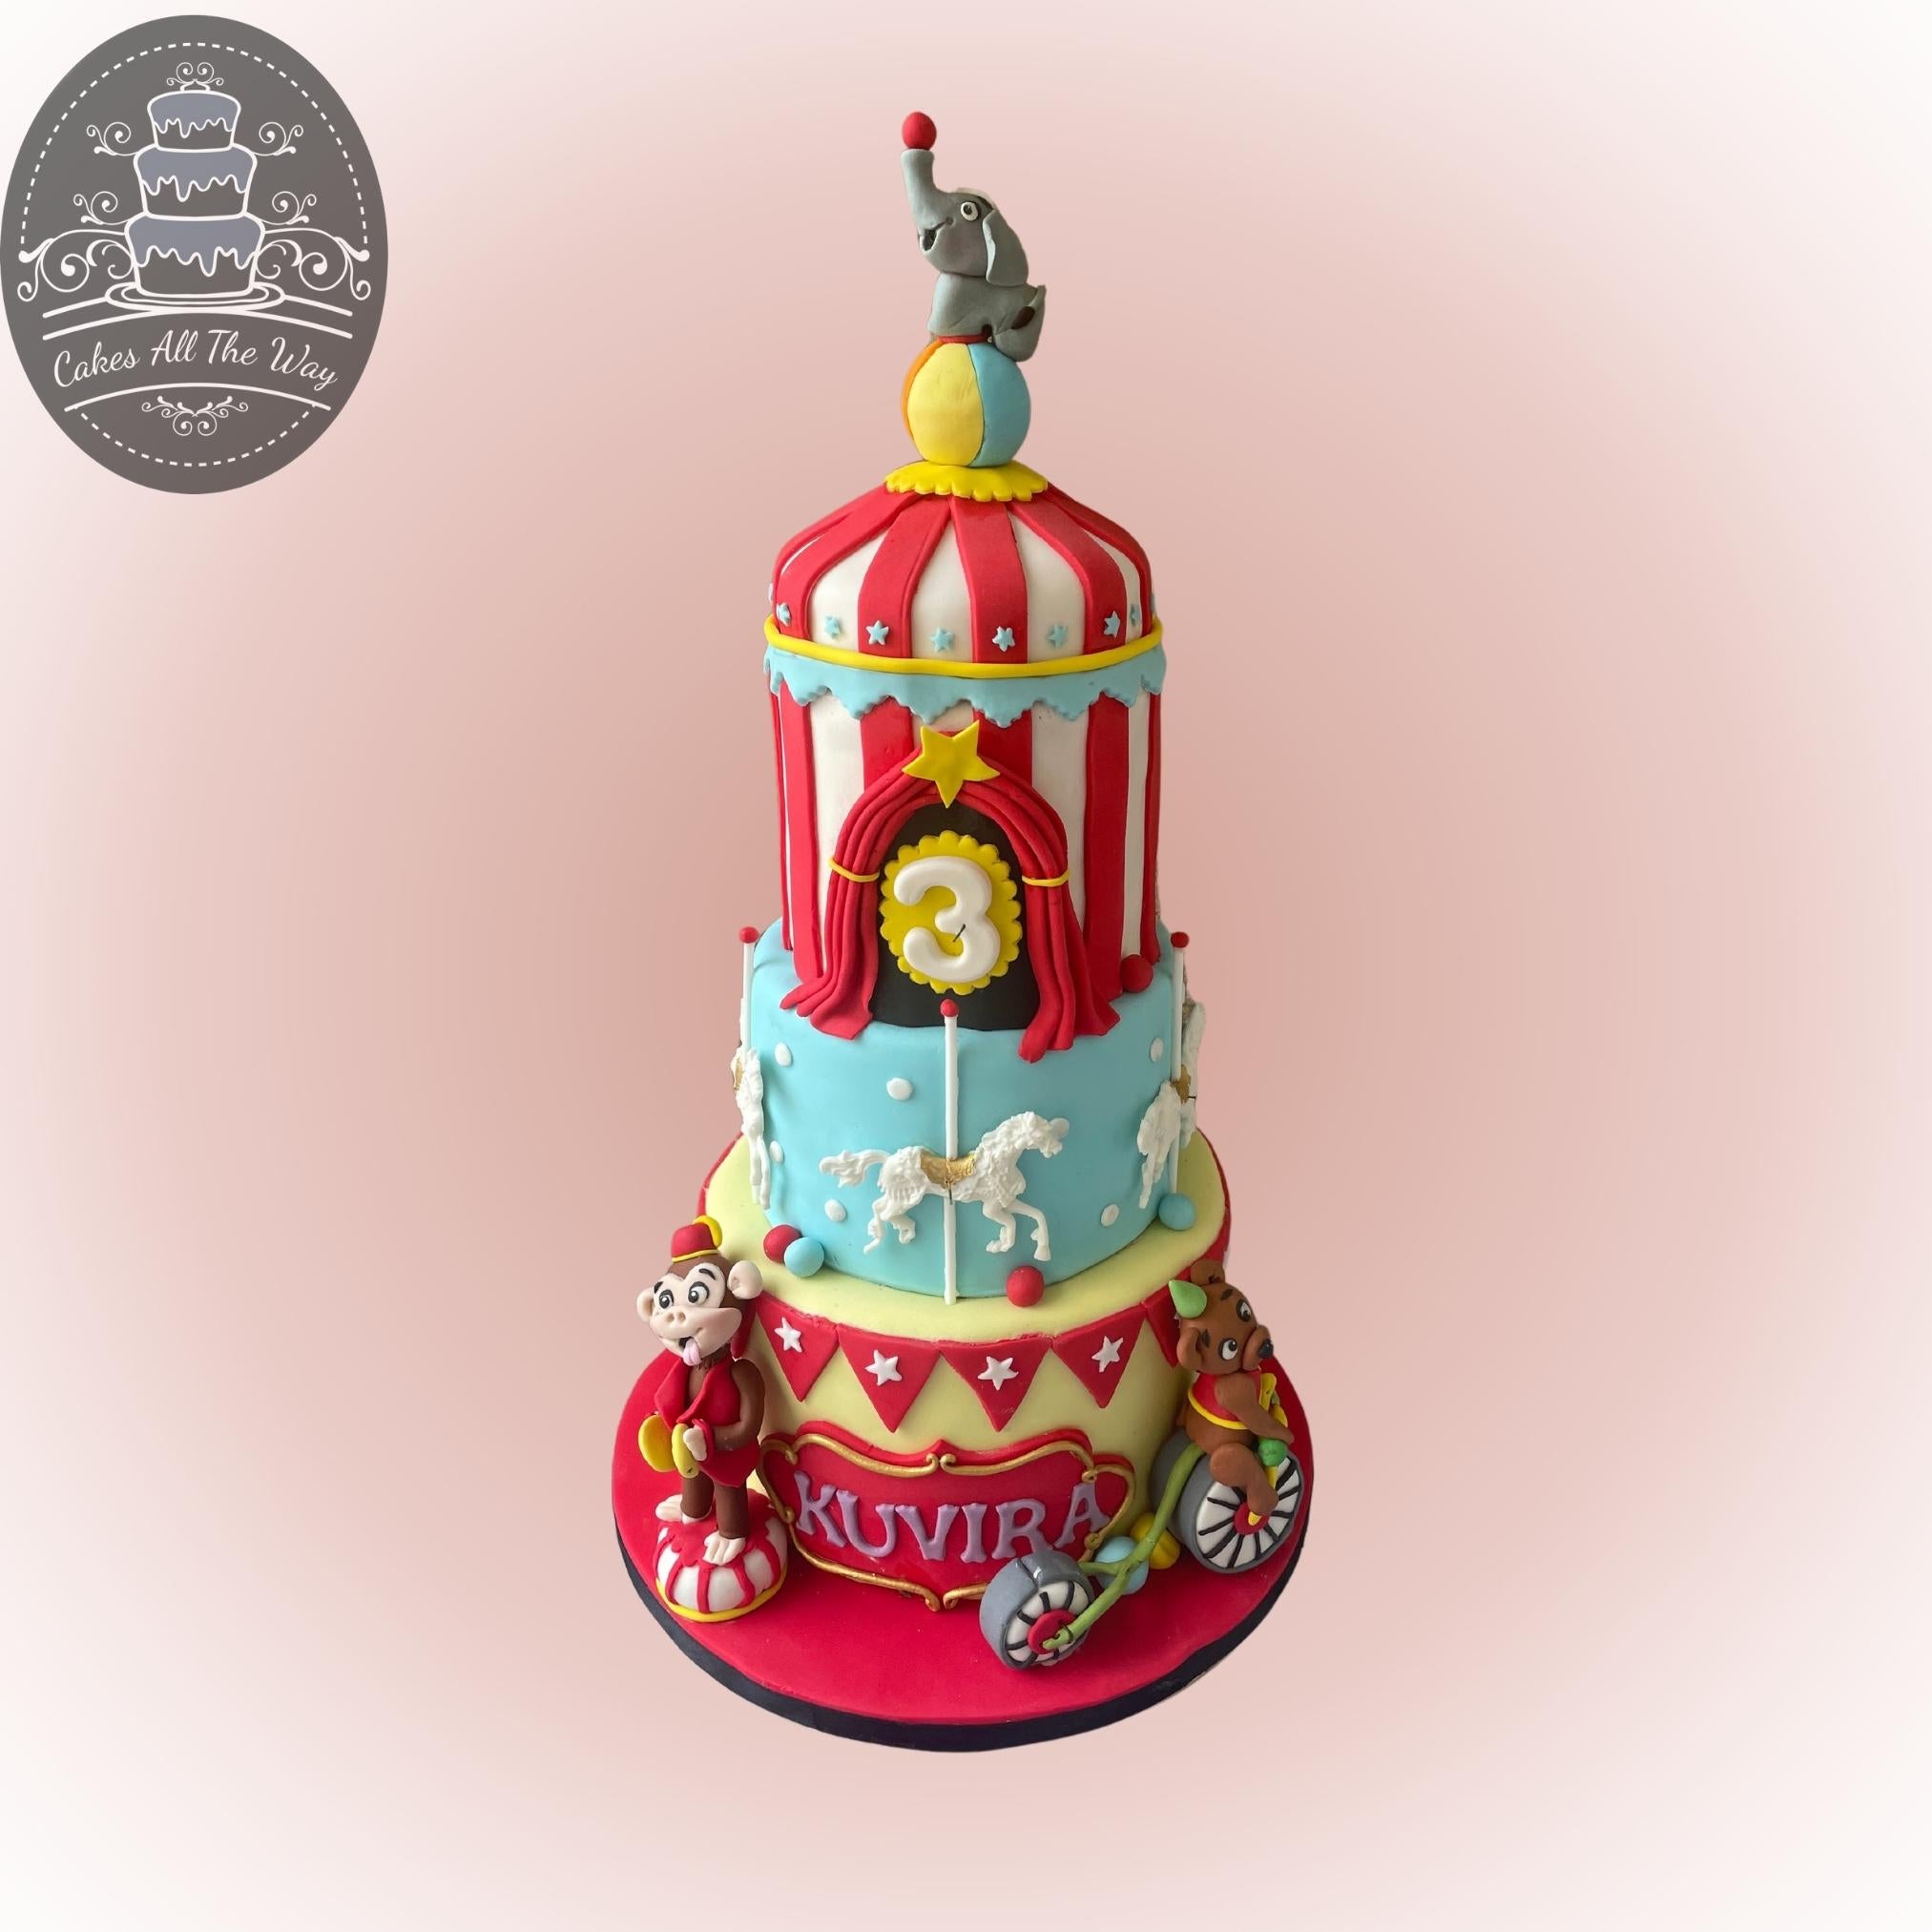 CLOWN CIRCUS THEME PERSONALISED EDIBLE ICING BIRTHDAY CAKE TOPPER & 8  CUPCAKES | eBay